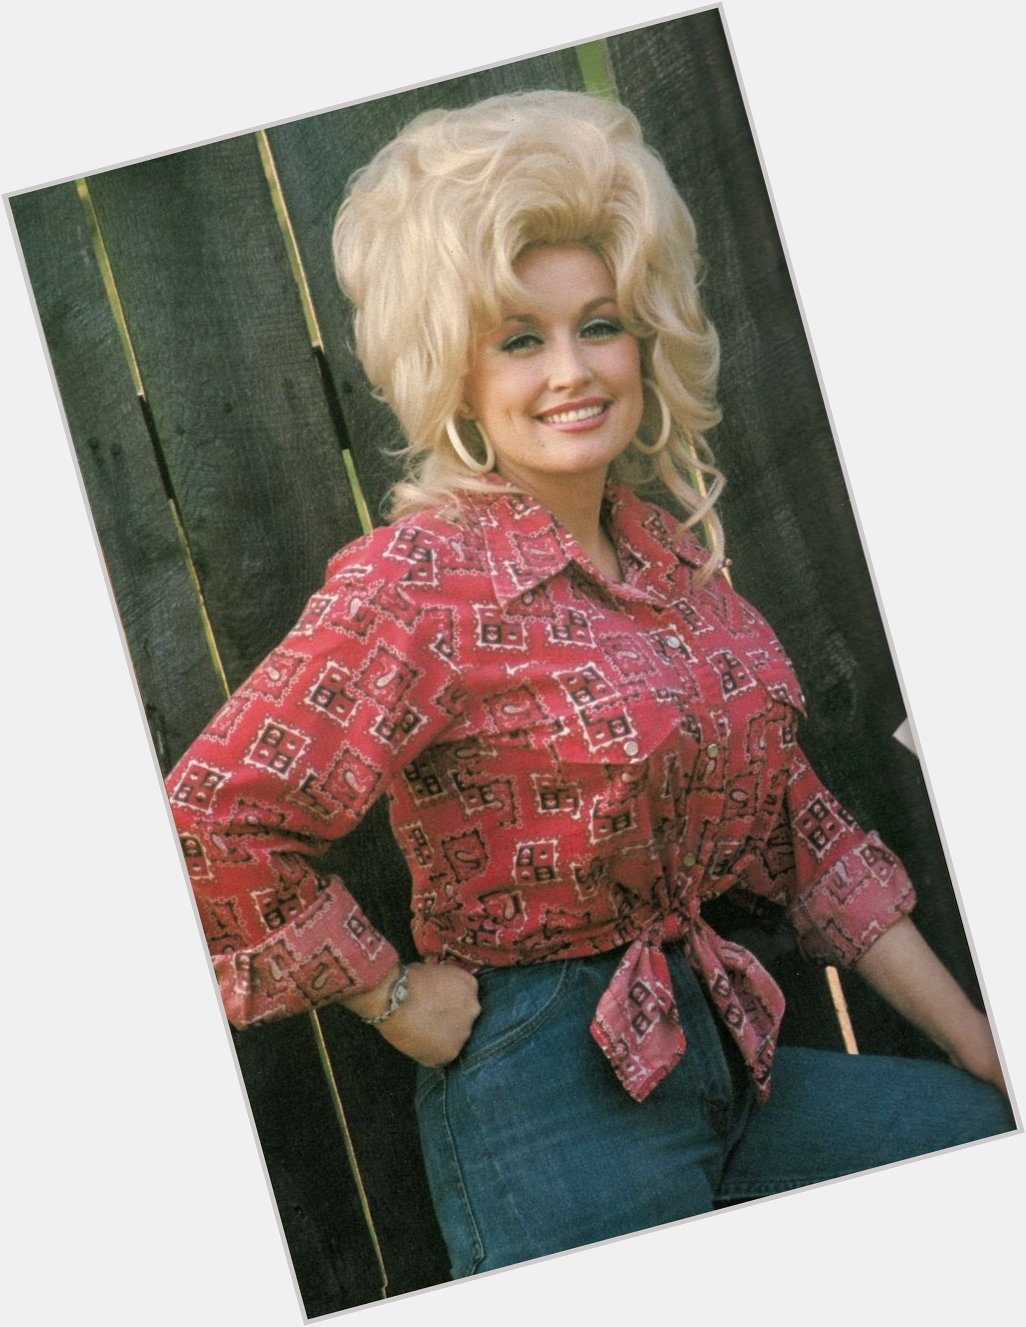 Happy Birthday to Dolly Parton, who is 71 today, born January 19, 1946 in Tennessee. 